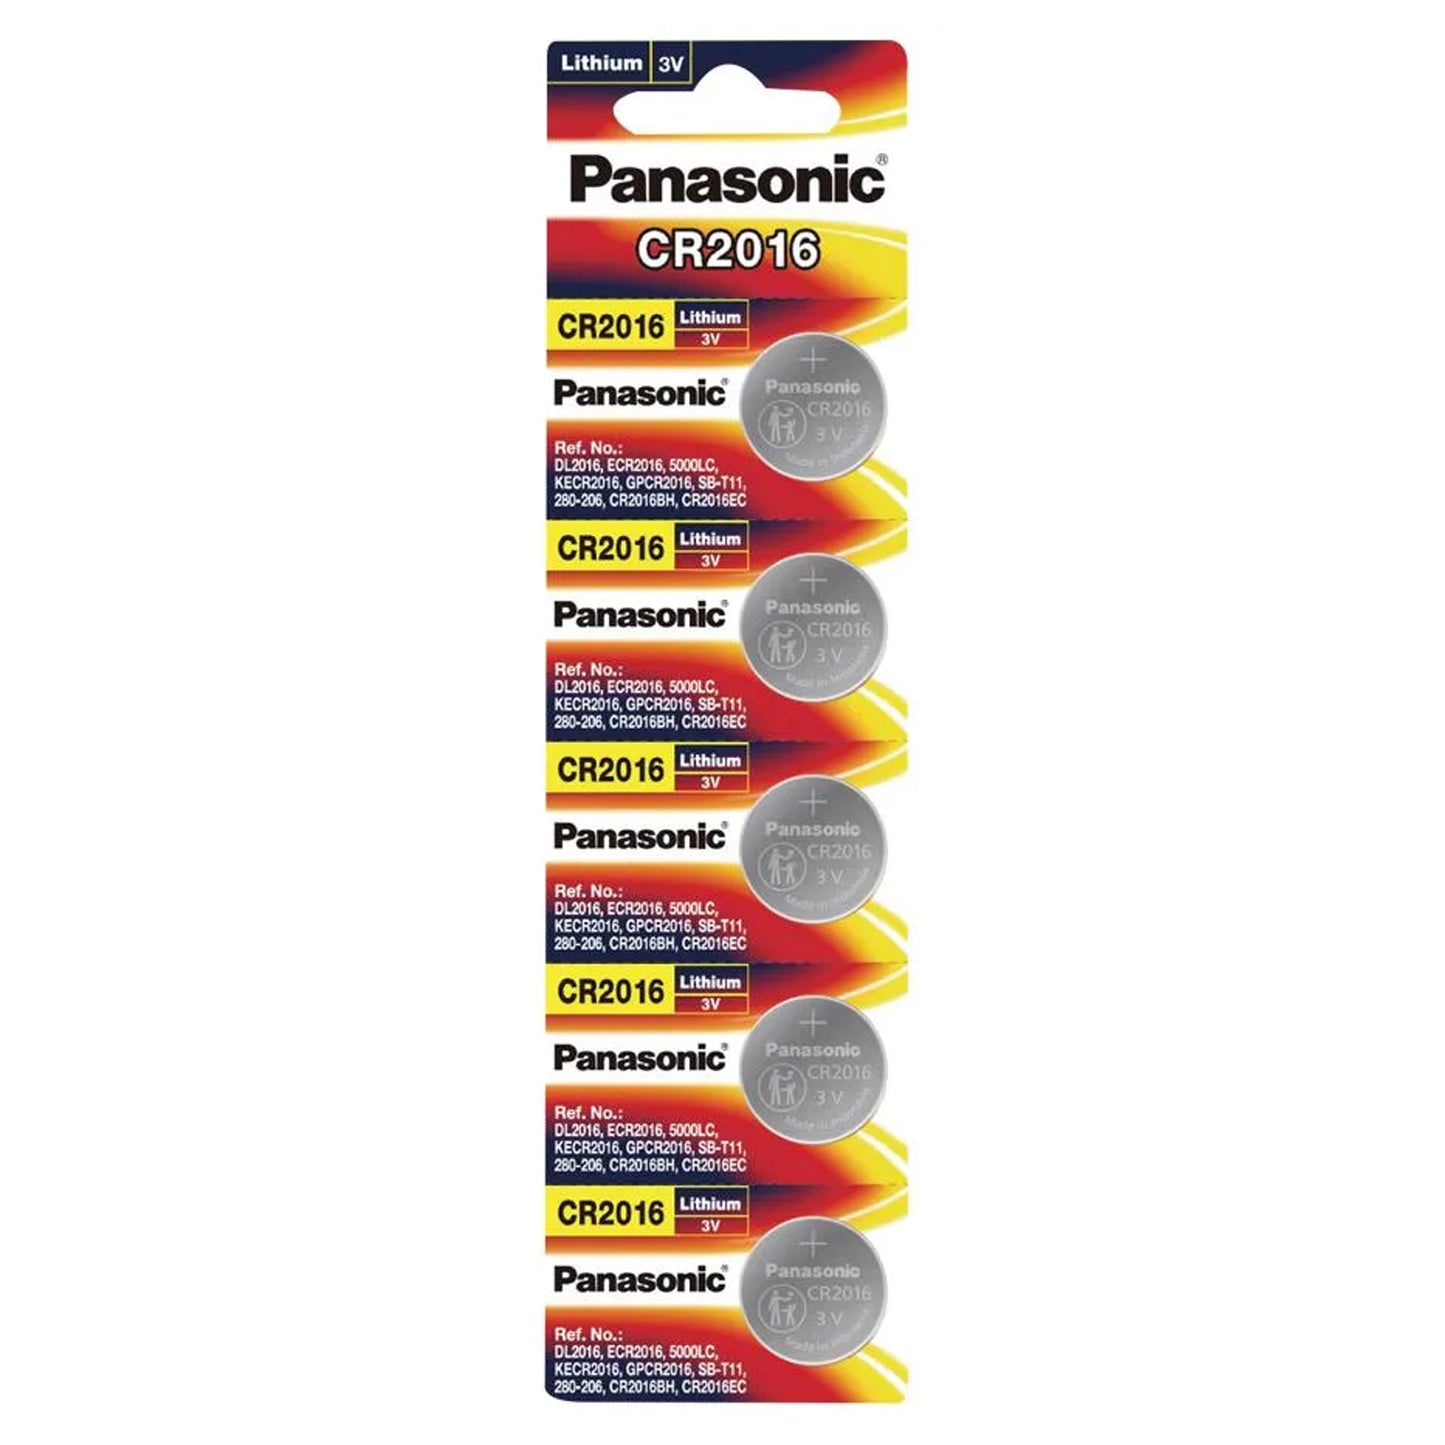 Panasonic CR2016 ECR2016 2016 Lithium Coin Cell Button Battery 3V (PACK OF 5)